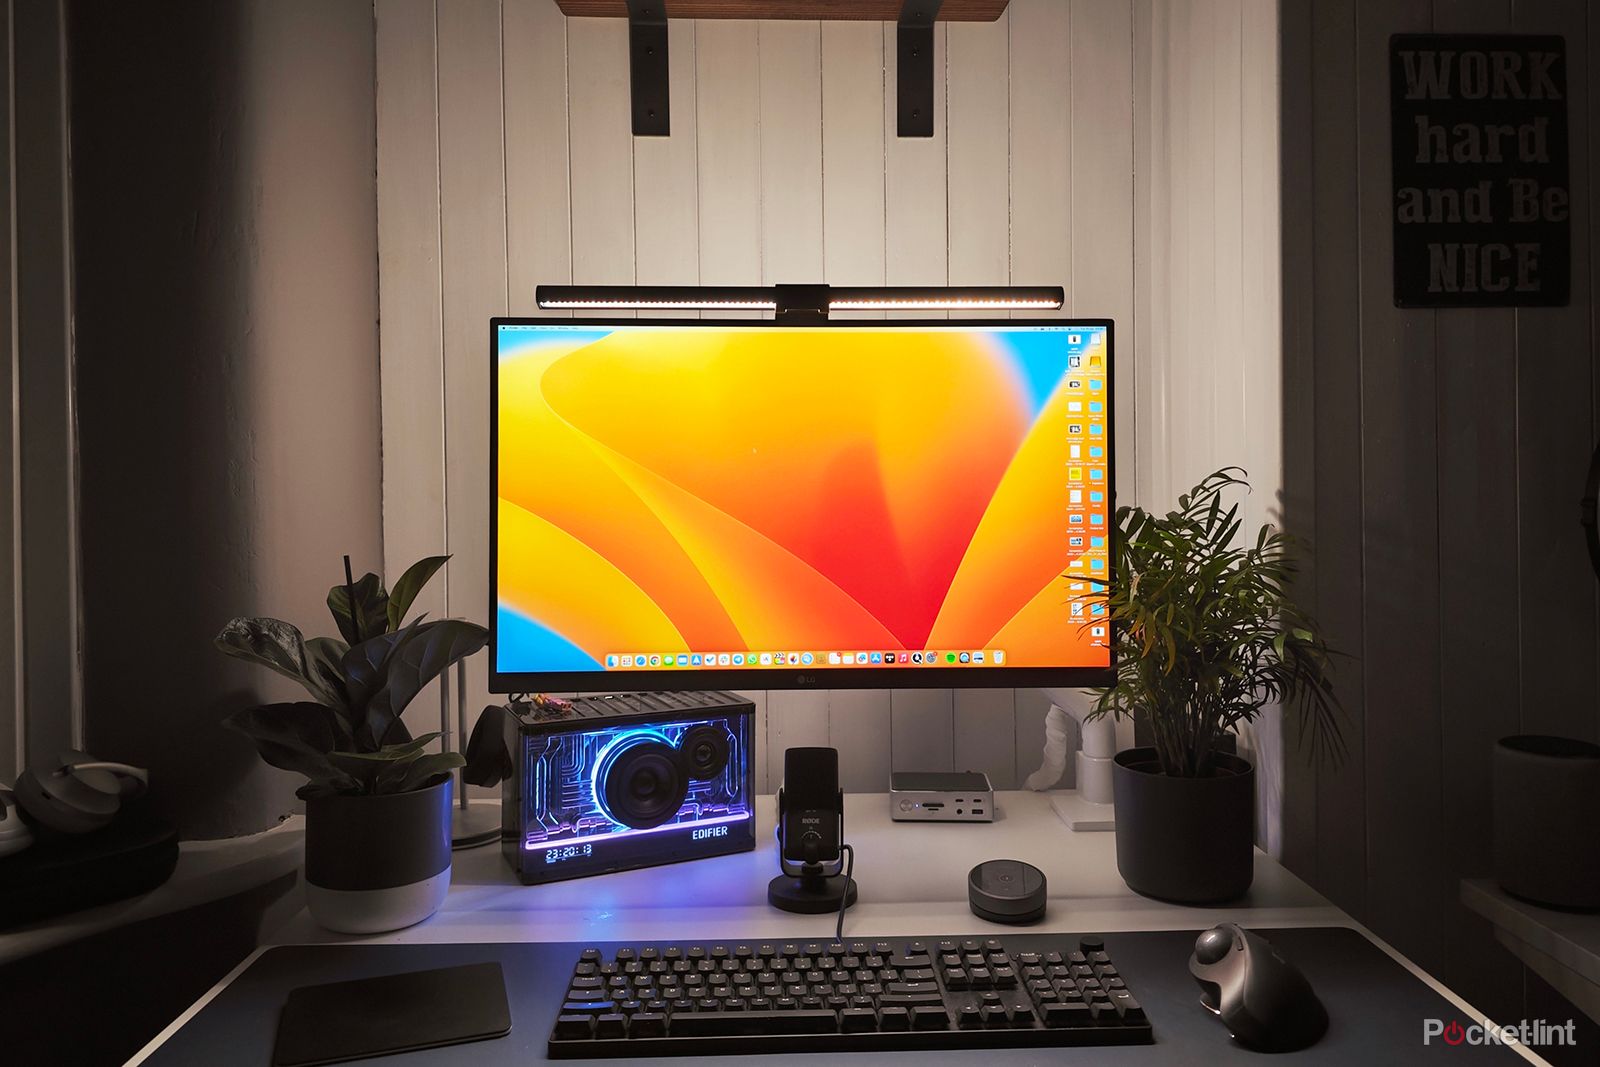 The Best Monitor Deals: Save up to $500 on a 32-inch LG monitor